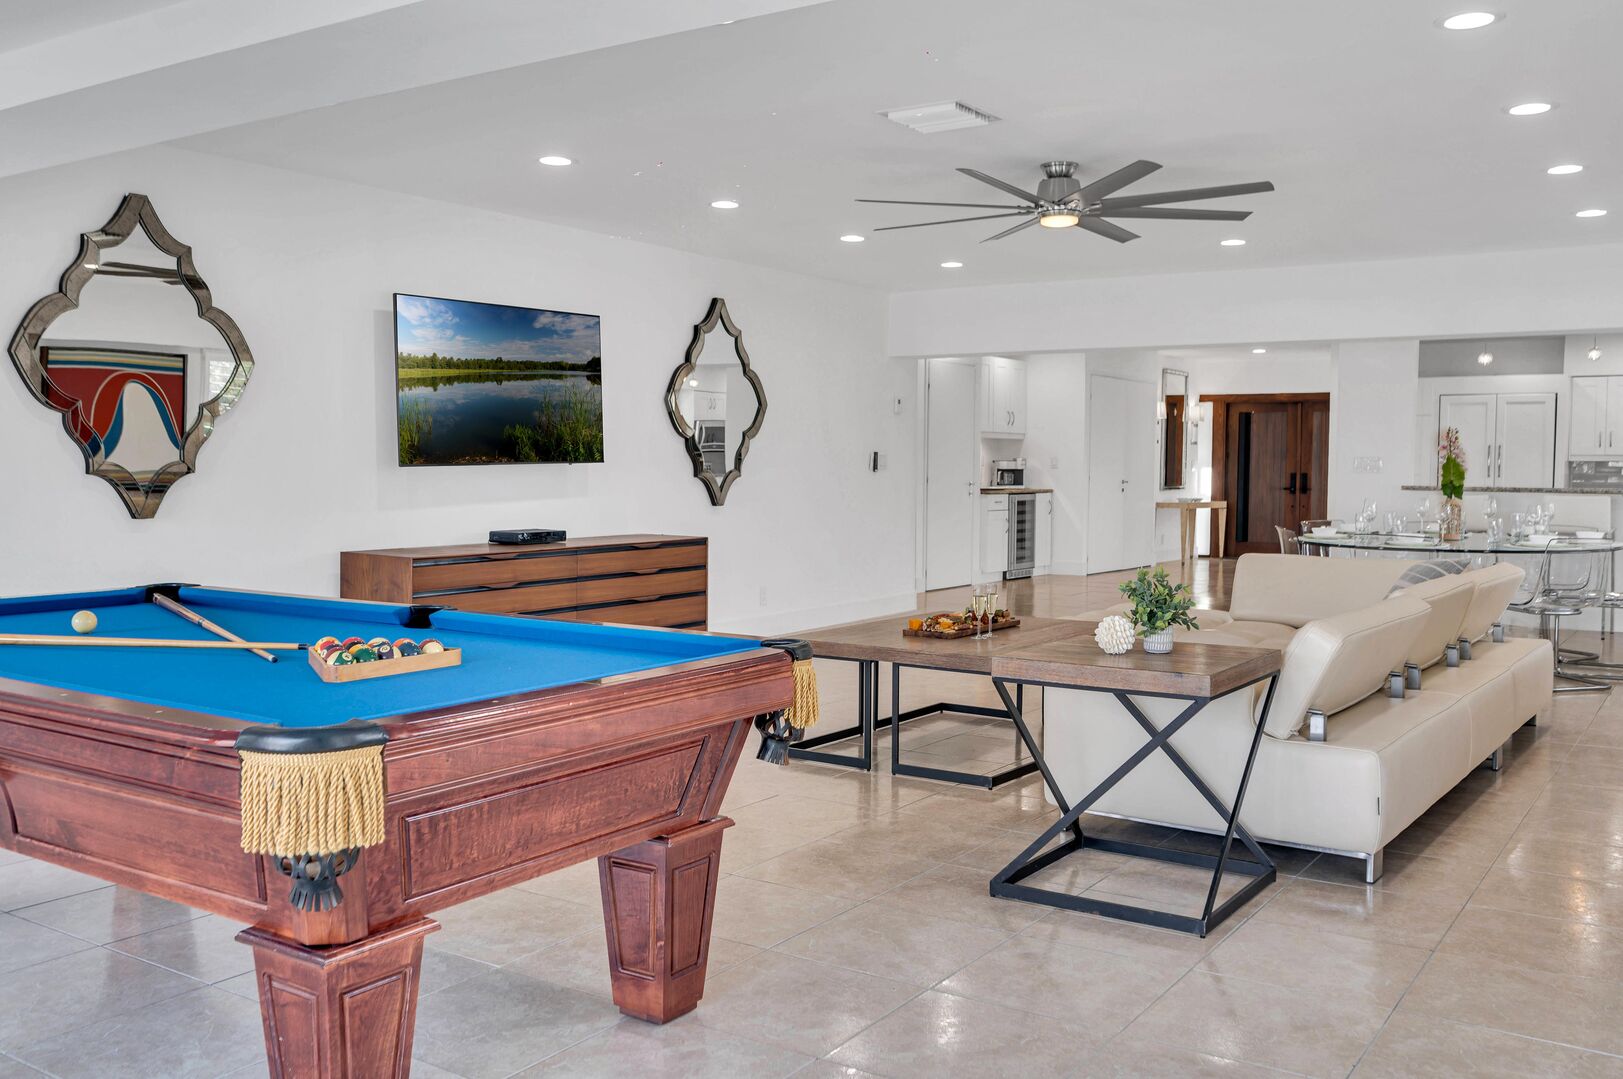 Play a game of pool and enjoy the views of the waterways and heated pool.